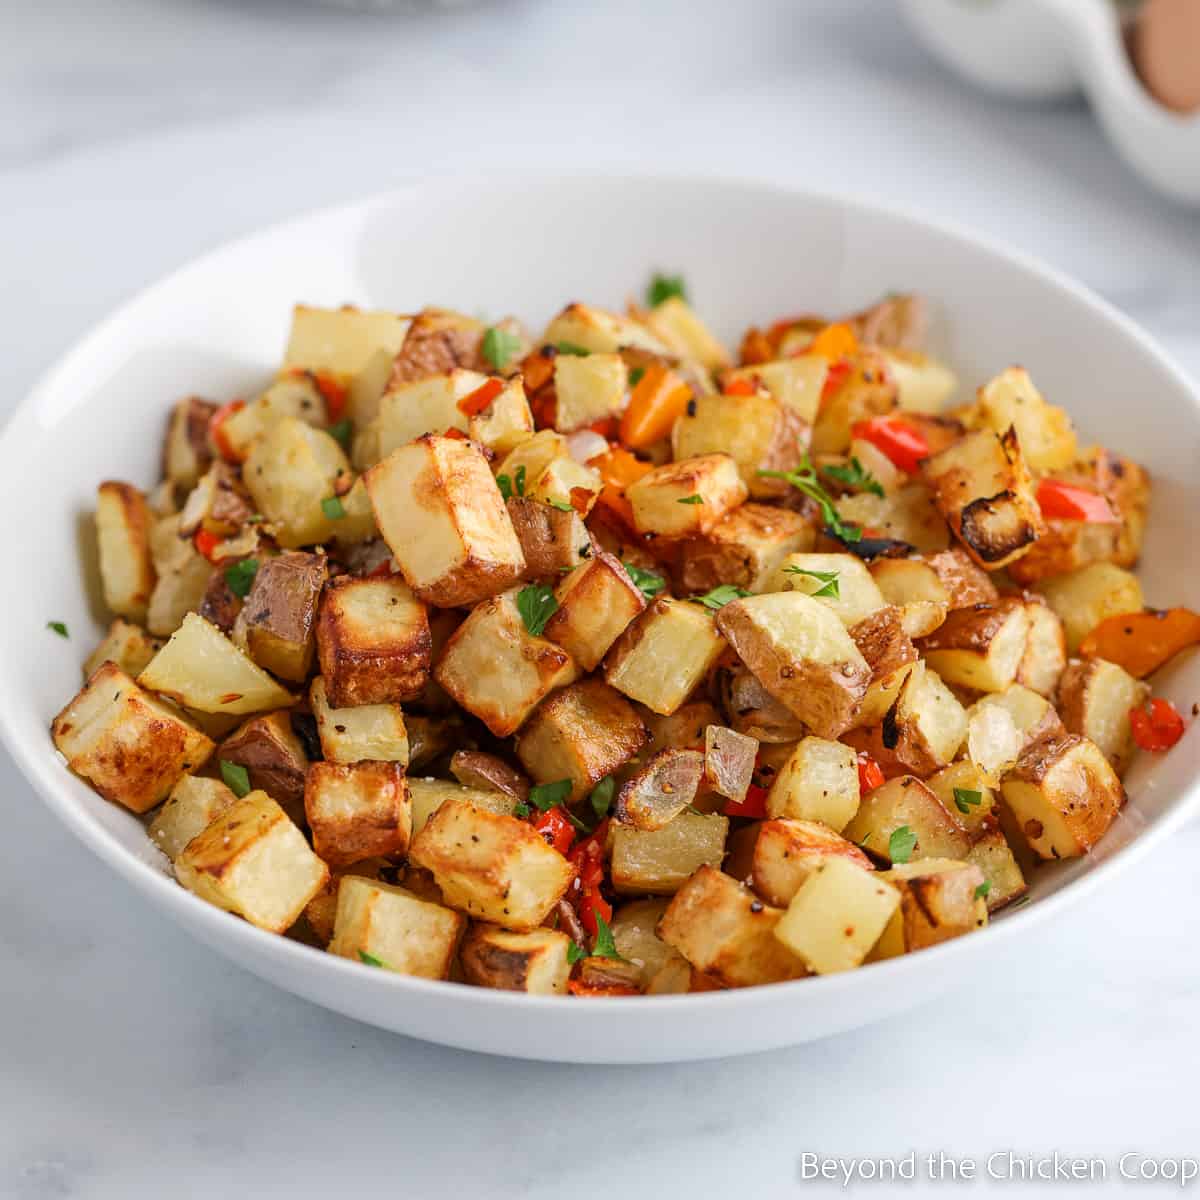 A bowl filled with crispy cubed potatoes.